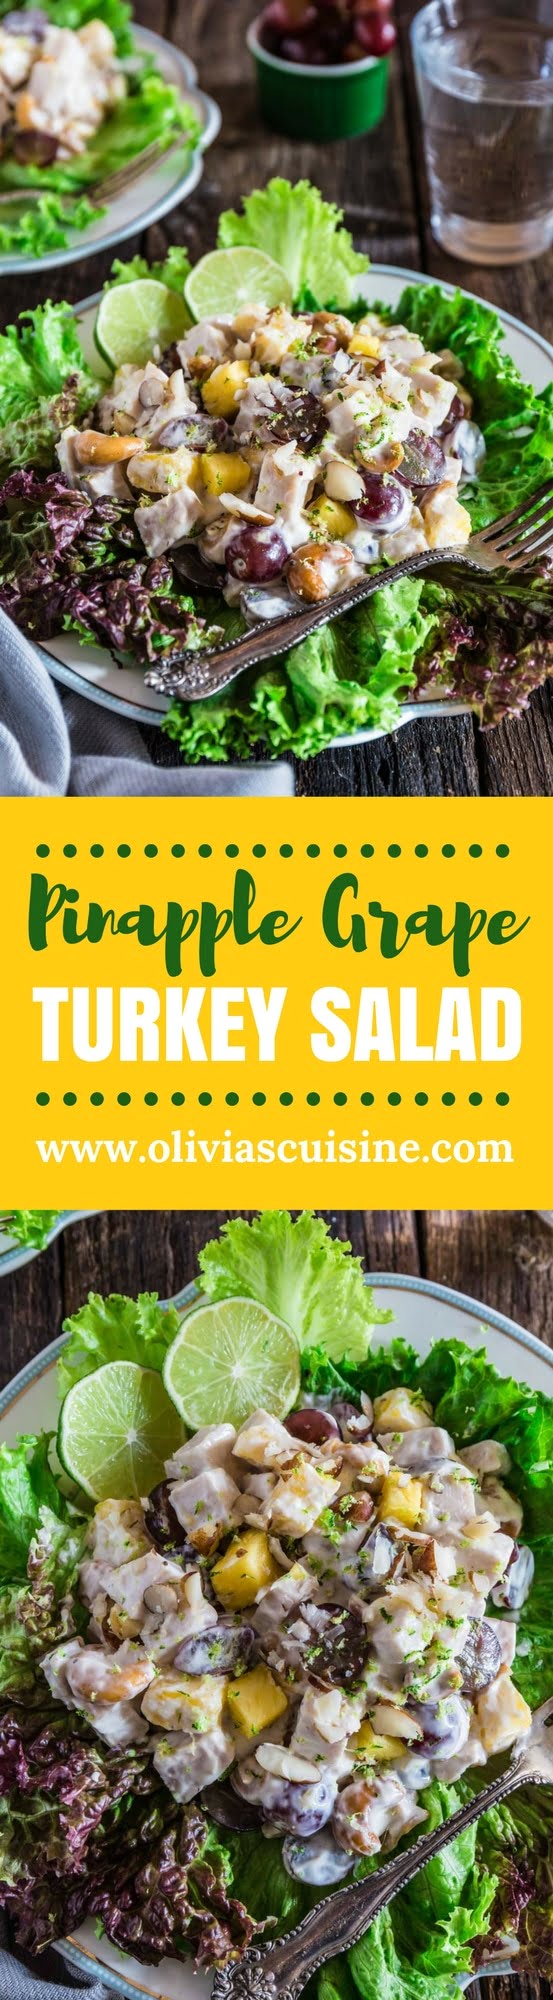 Pineapple Grape Turkey Salad | www.oliviascuisine.com | This delicious tropical twist on a creamy turkey salad makes this the summer salad nobody can resist! Perfect in sandwiches, spread on crackers or just as is. (Recipe and food photography by @oliviascuisine.)